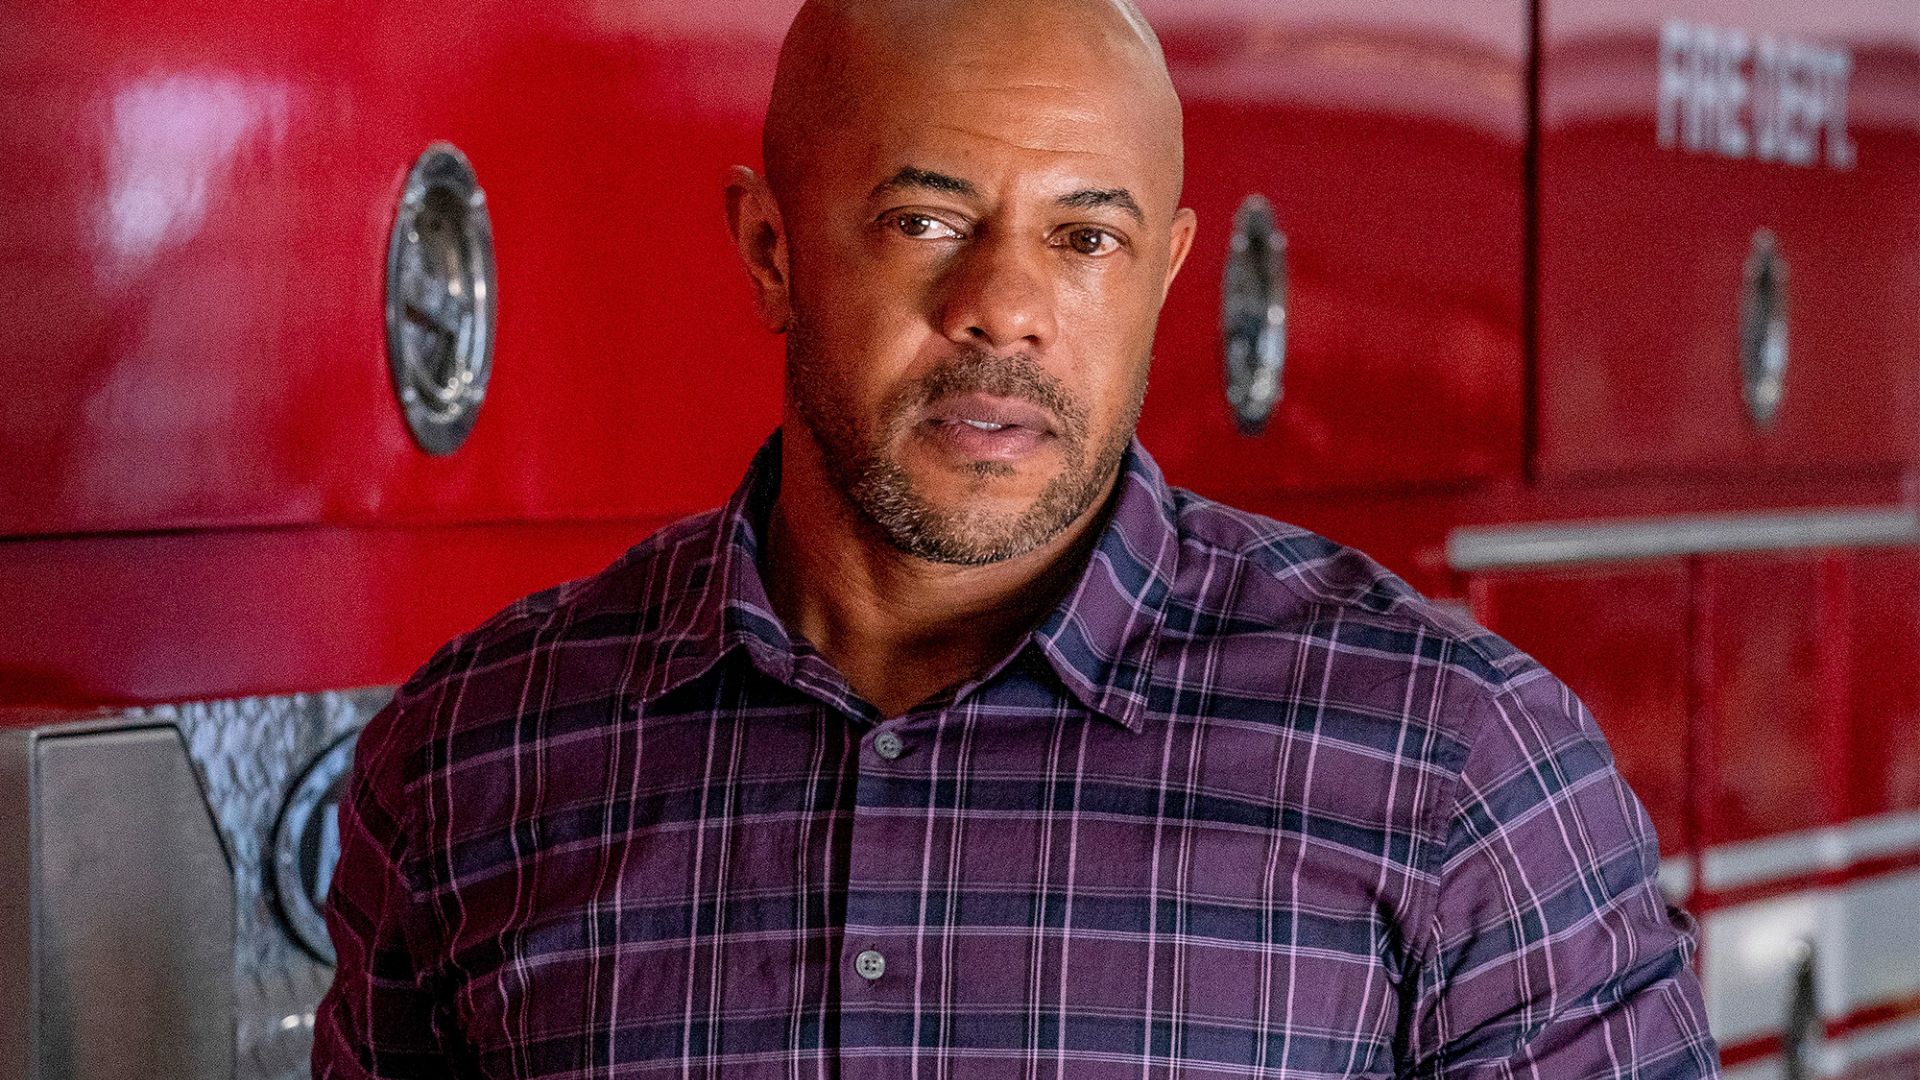 Rockmond Dunbar - Best Known For His Roles As Baines On The NBC Series Earth 2